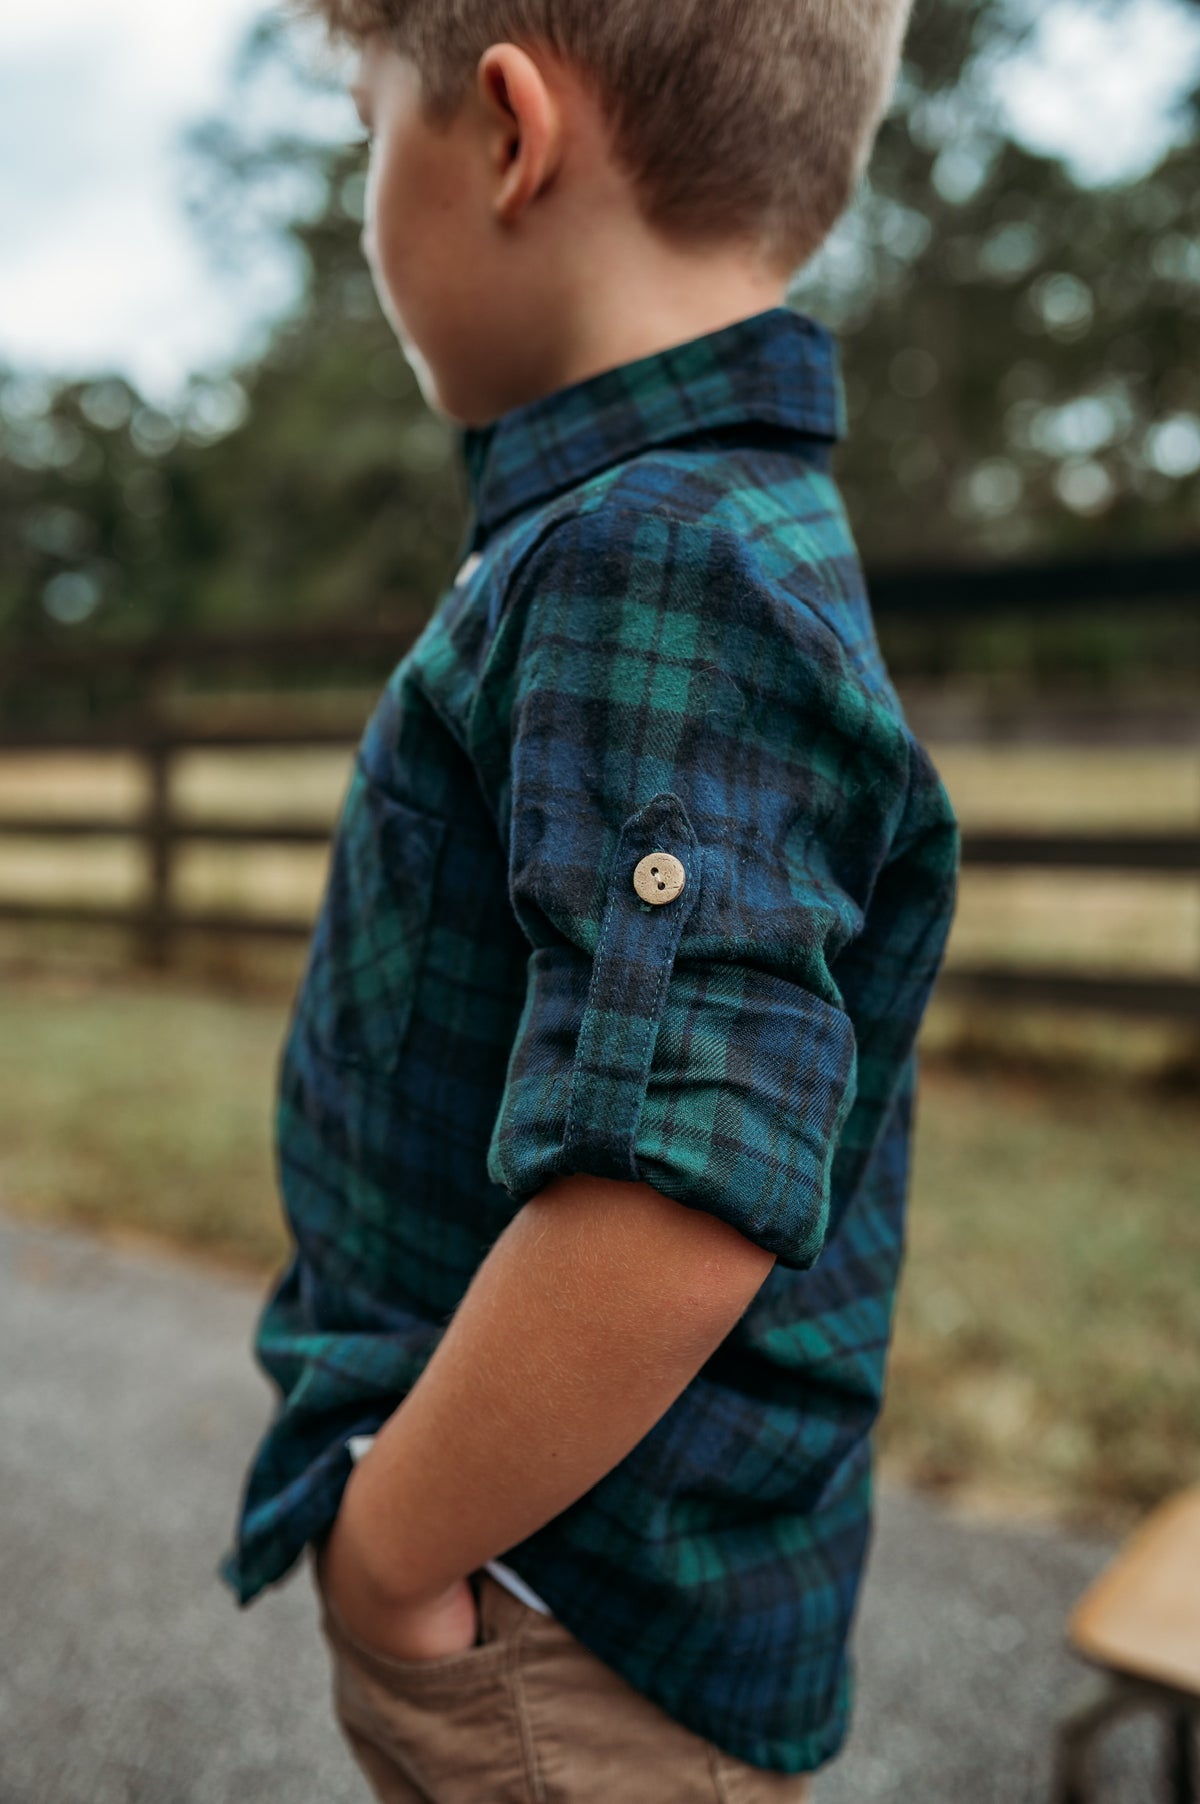 Emerald Frost Flannel Button-Up Shirt